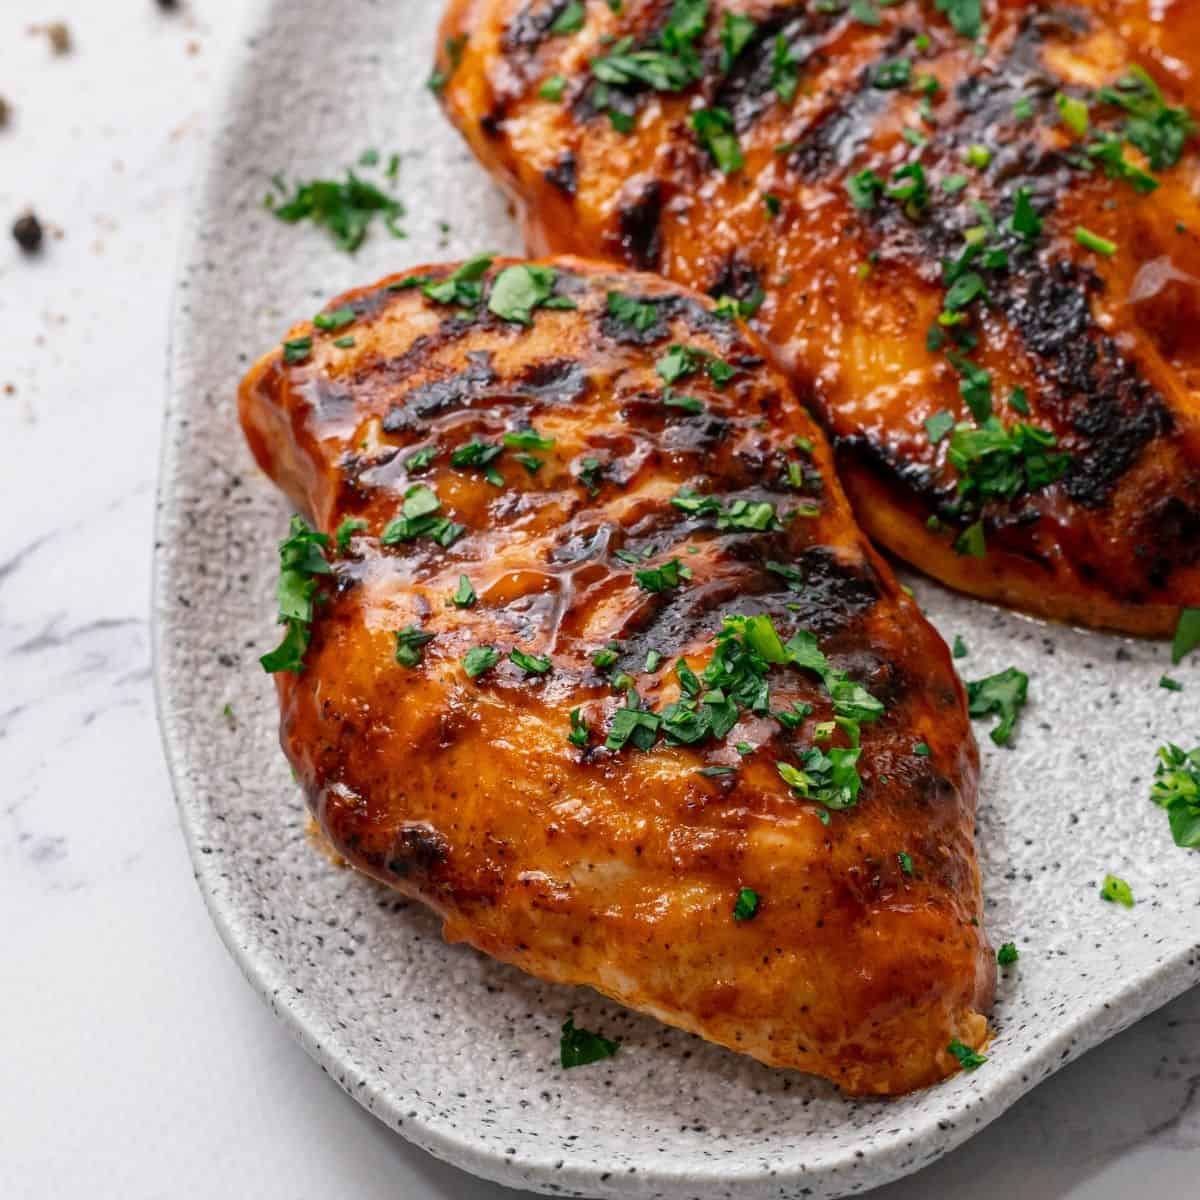 Juicy Grilled Chicken Breast with Homemade Spice Rub